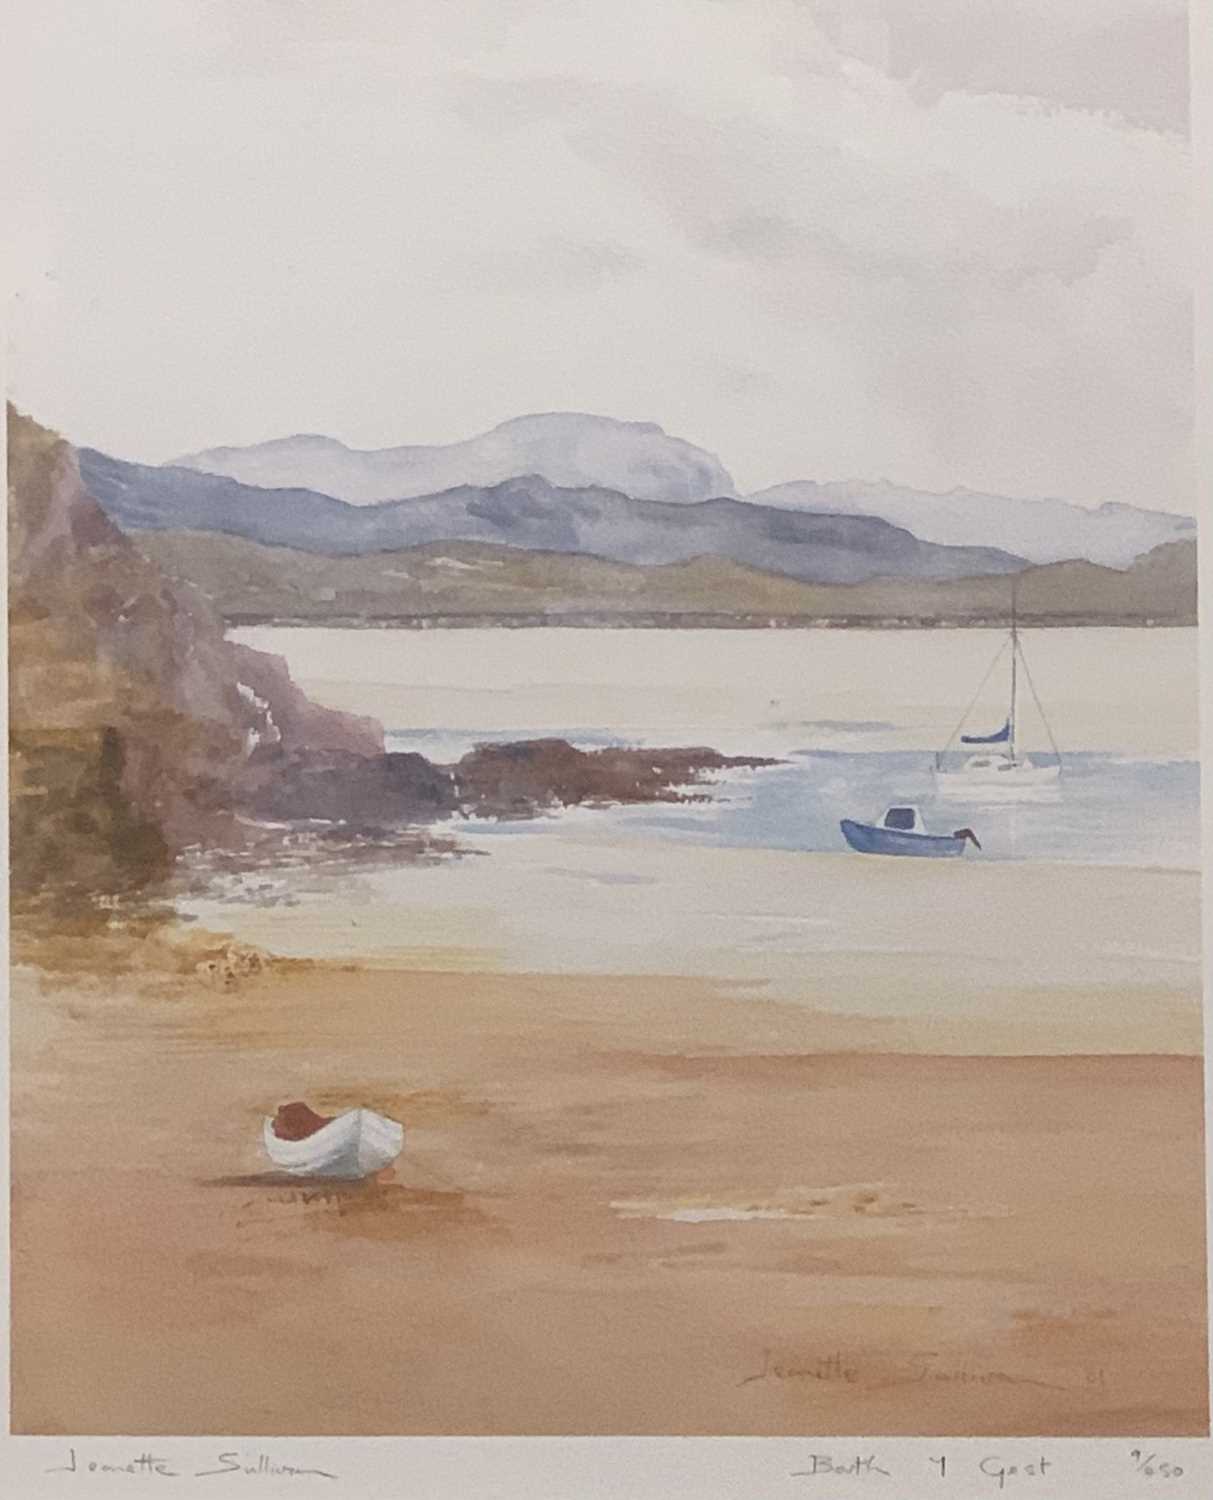 JEANETTE SULLIVAN limited edition coloured print (9/450) - Borth y Gest, signed, titled and numbered